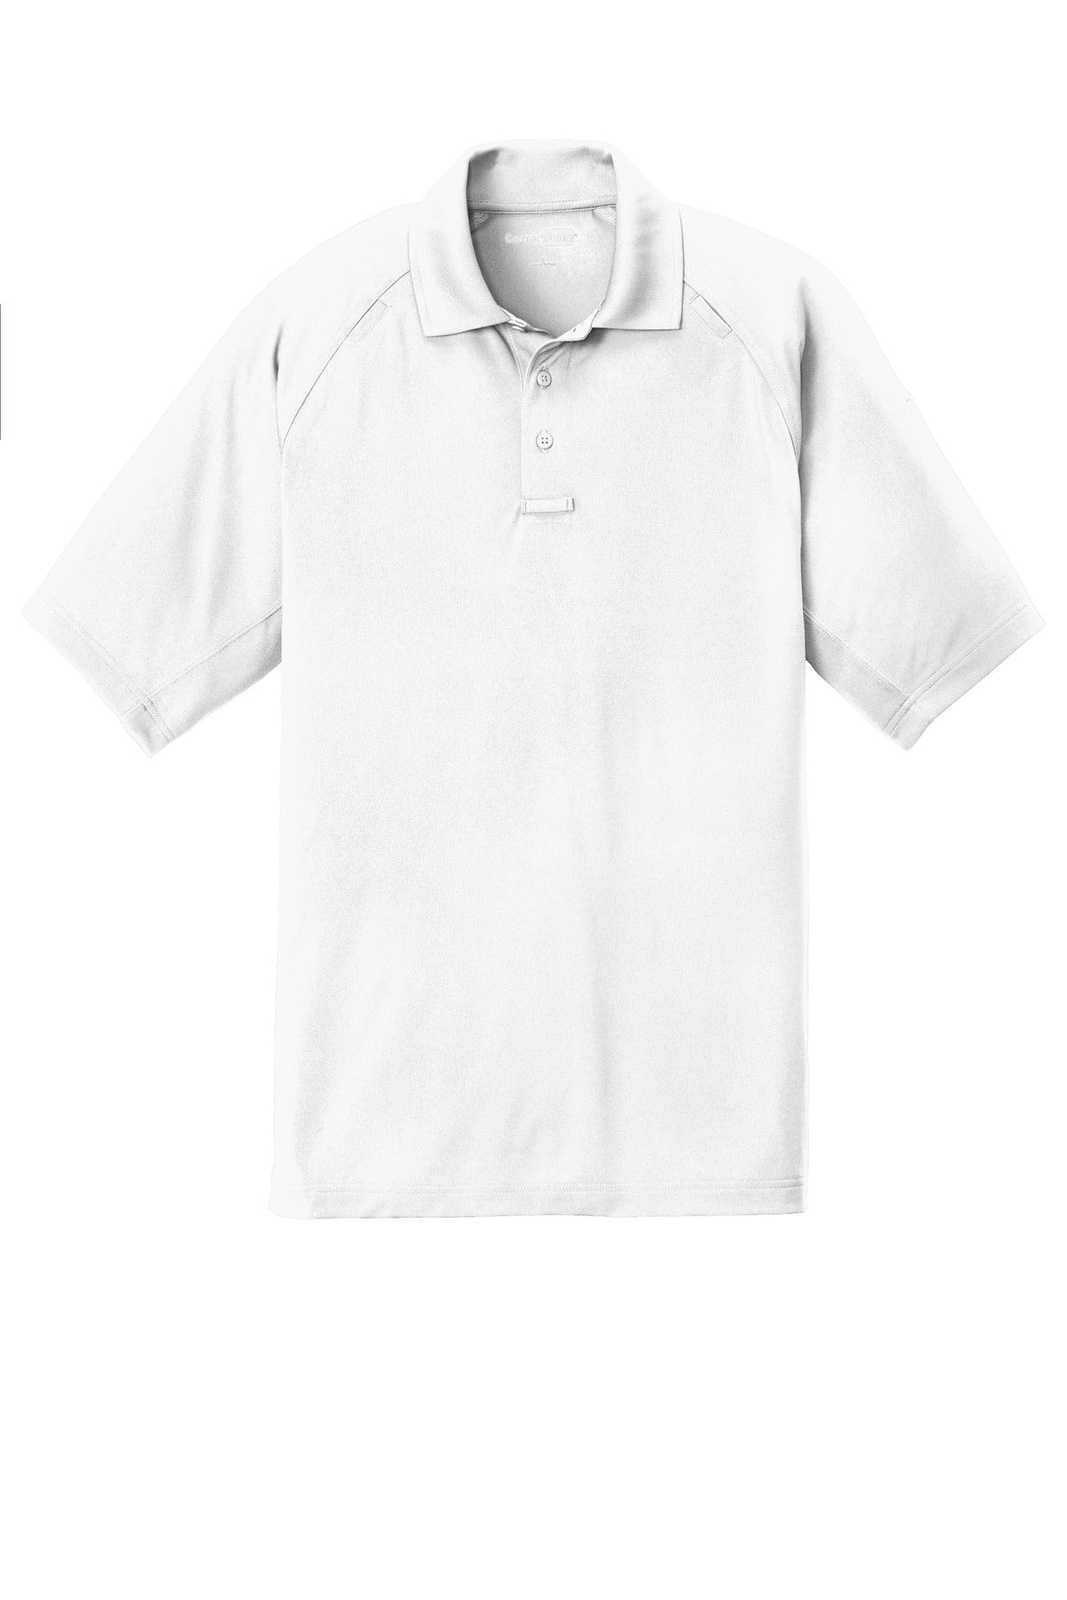 CornerStone CS420 Select Lightweight Snag-Proof Tactical Polo - White - HIT a Double - 5